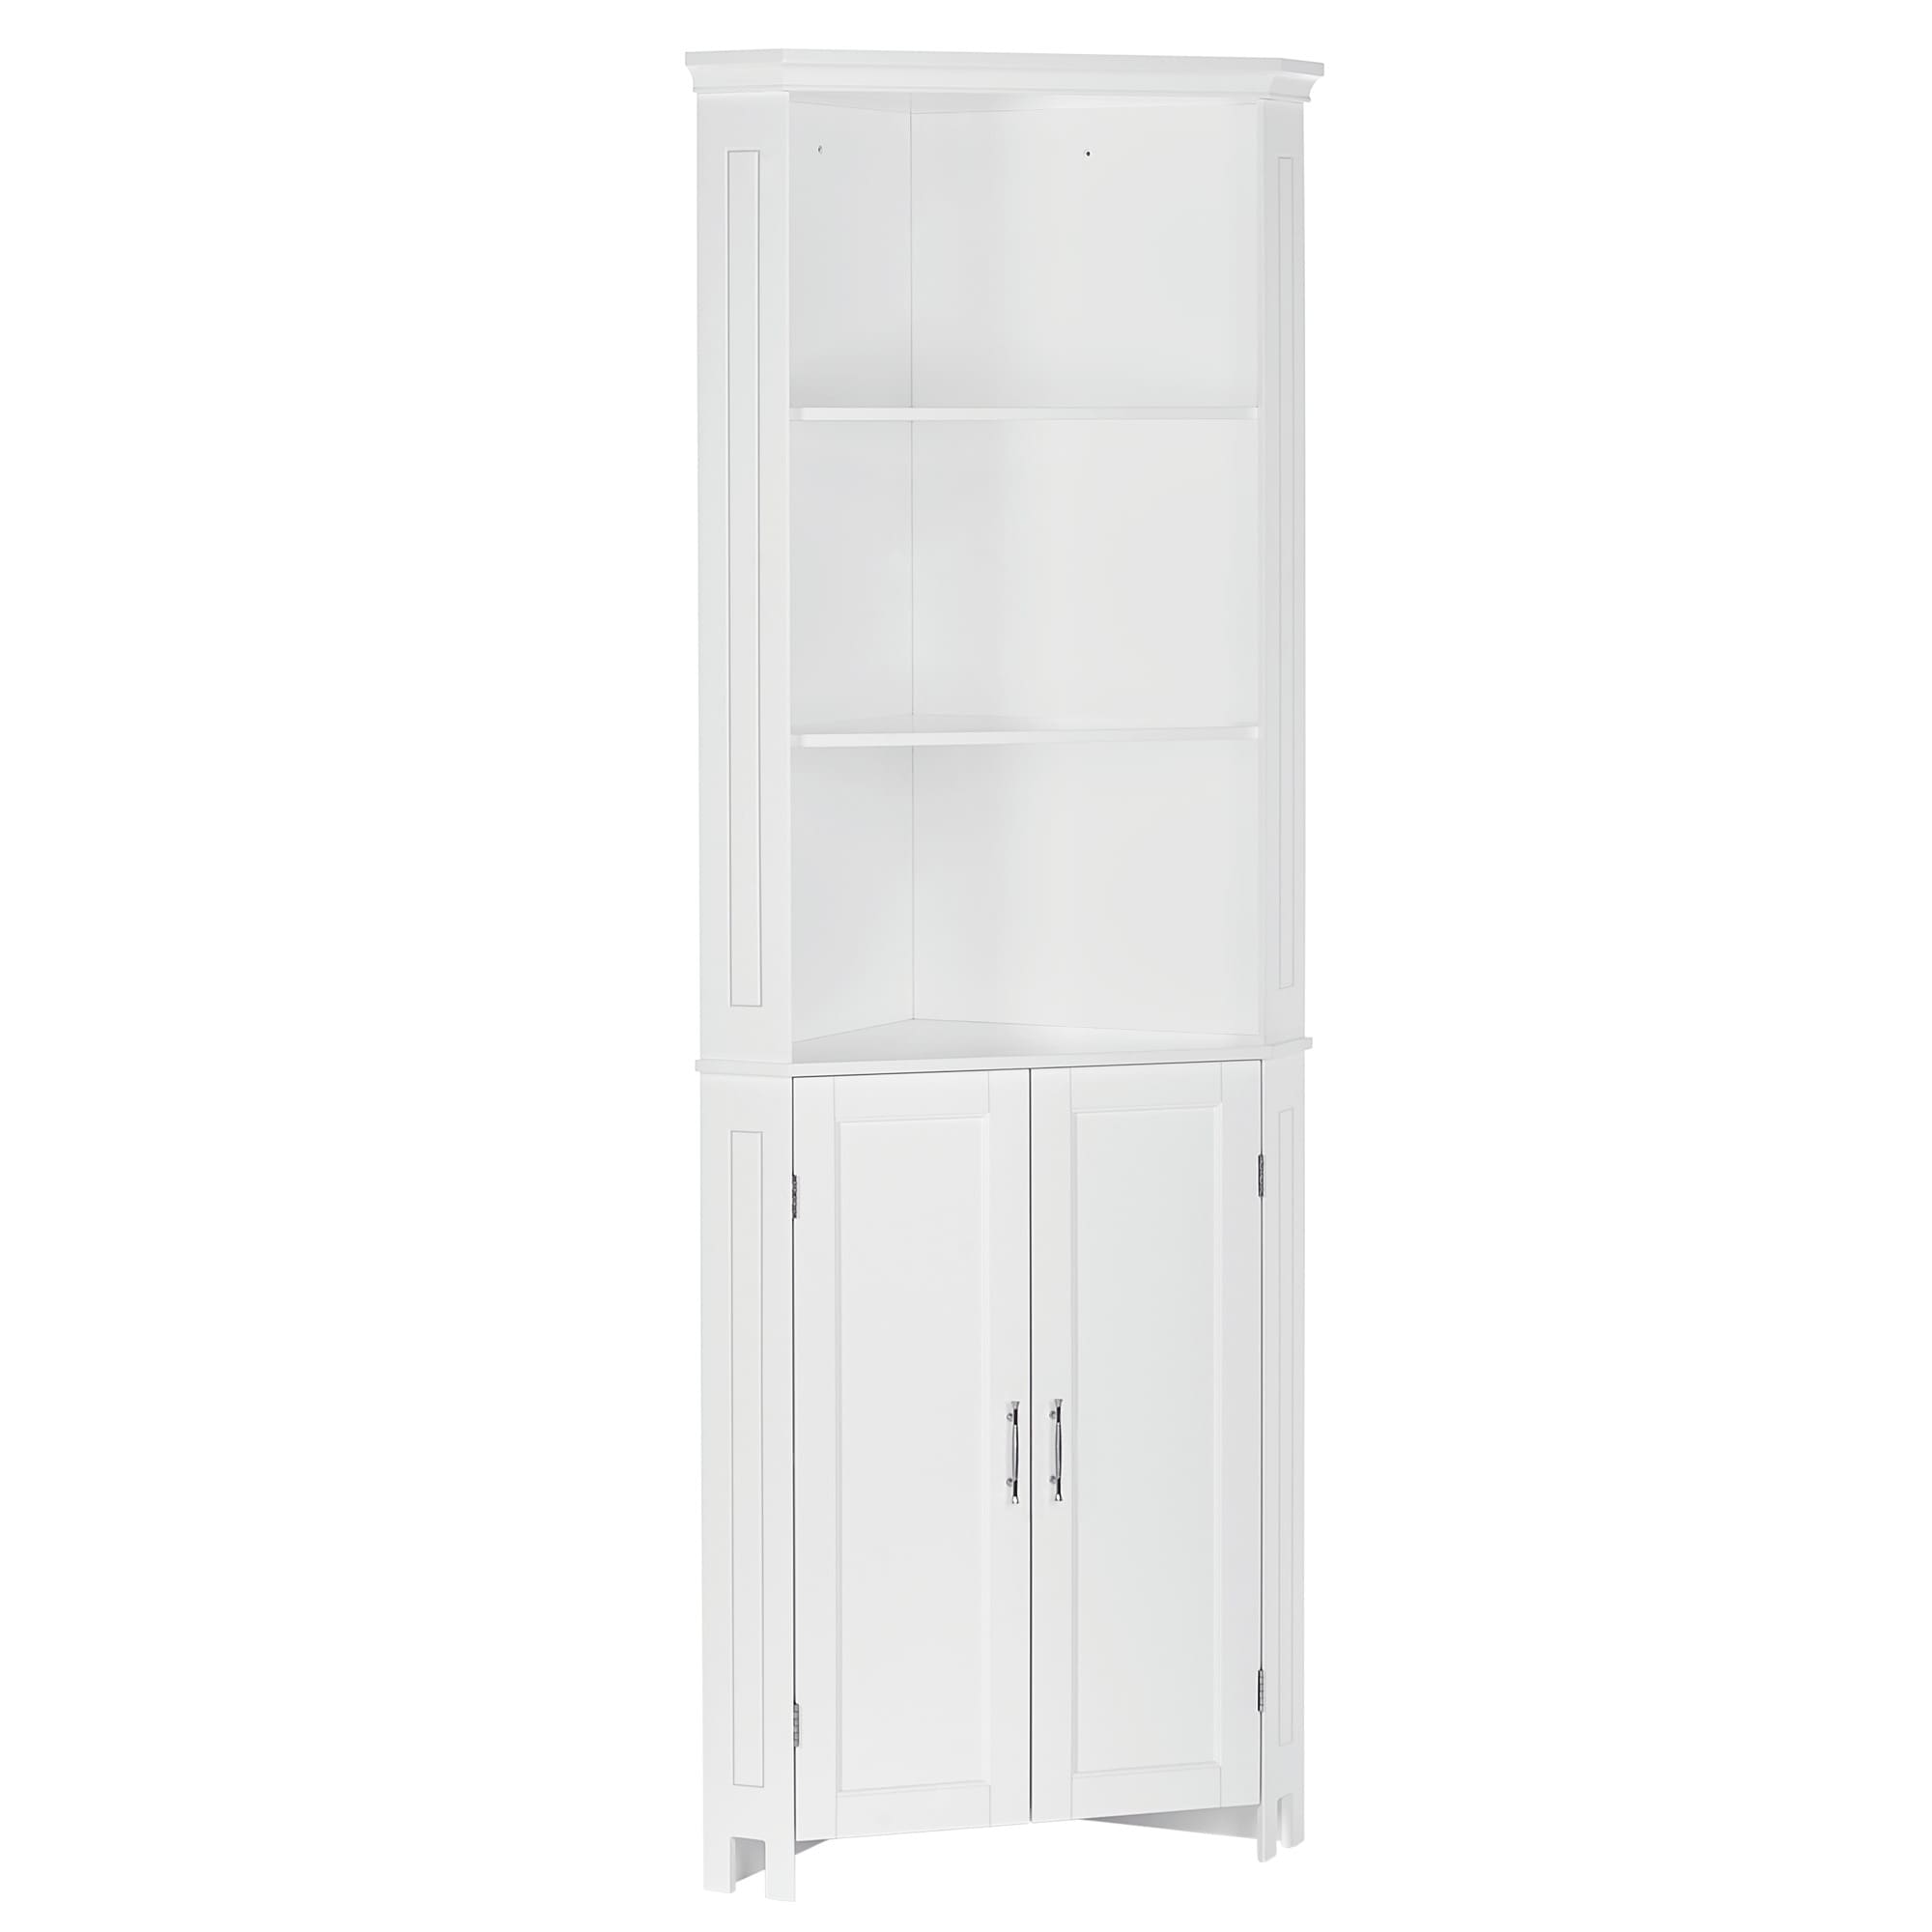 Riverridge Somerset 26 In X 70 18 31 White Freestanding Corner Linen Cabinet The Cabinets Department At Lowes Com